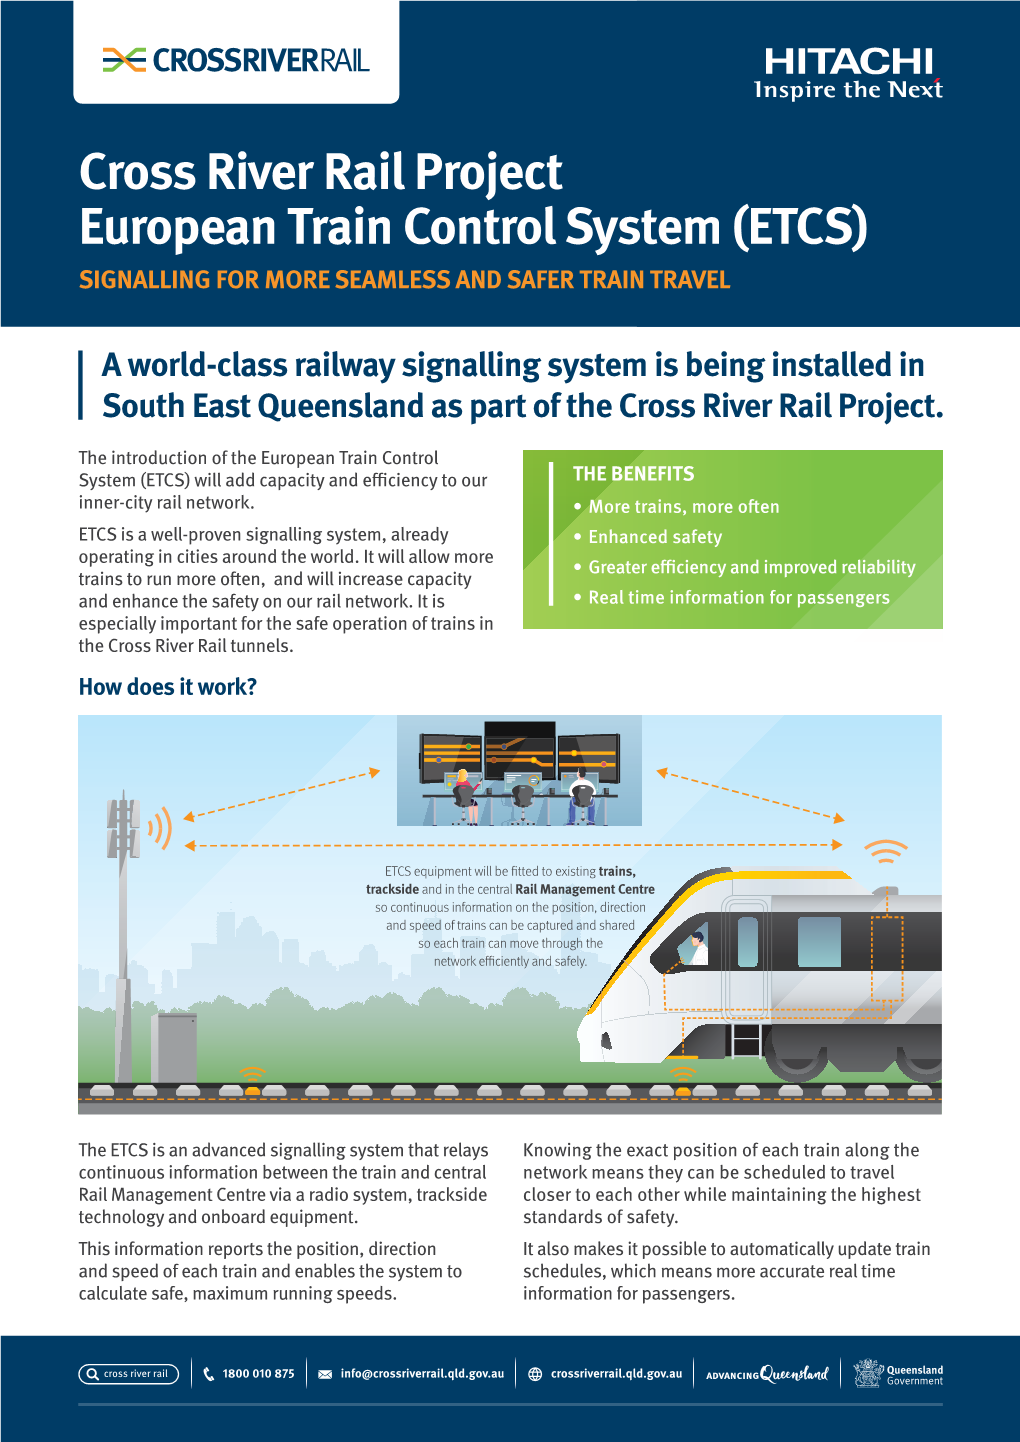 Cross River Rail Project European Train Control System (ETCS) SIGNALLING for MORE SEAMLESS and SAFER TRAIN TRAVEL